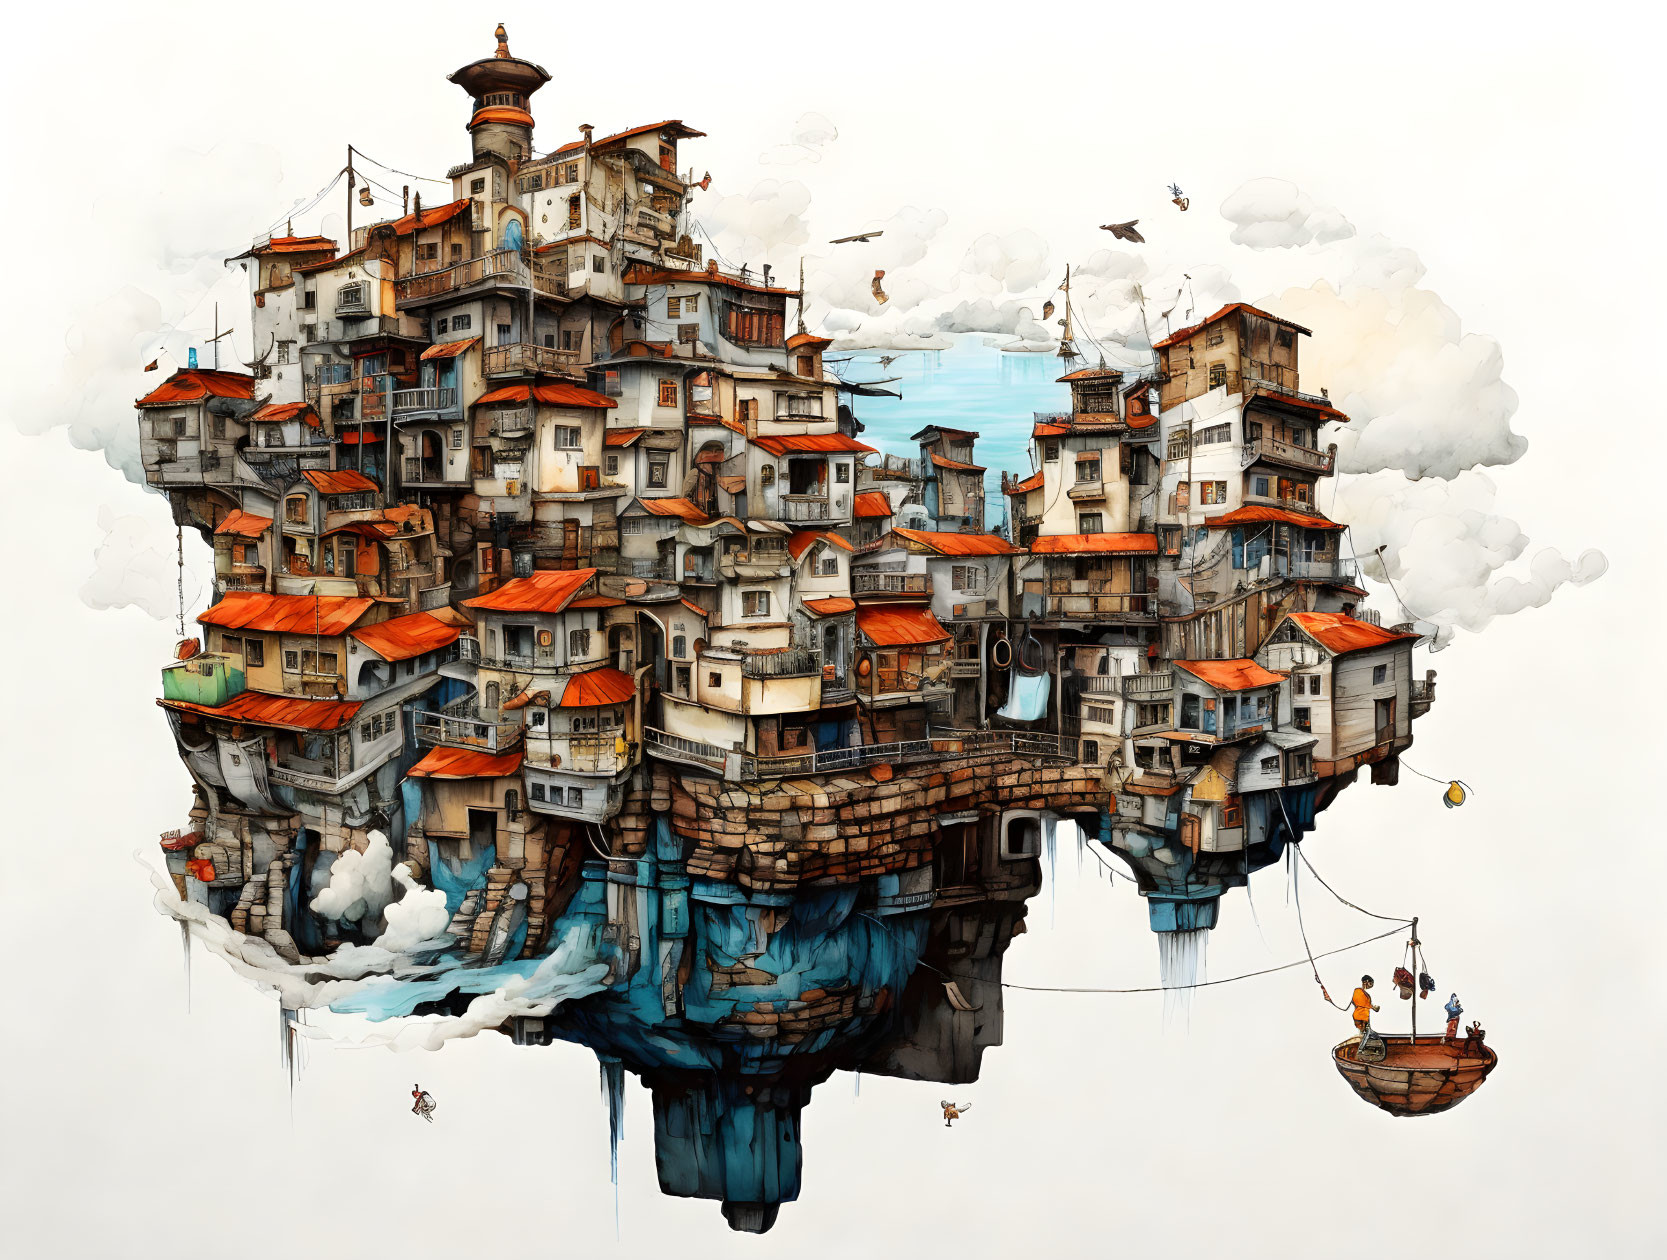 A floating town in the vast ocean of the sky